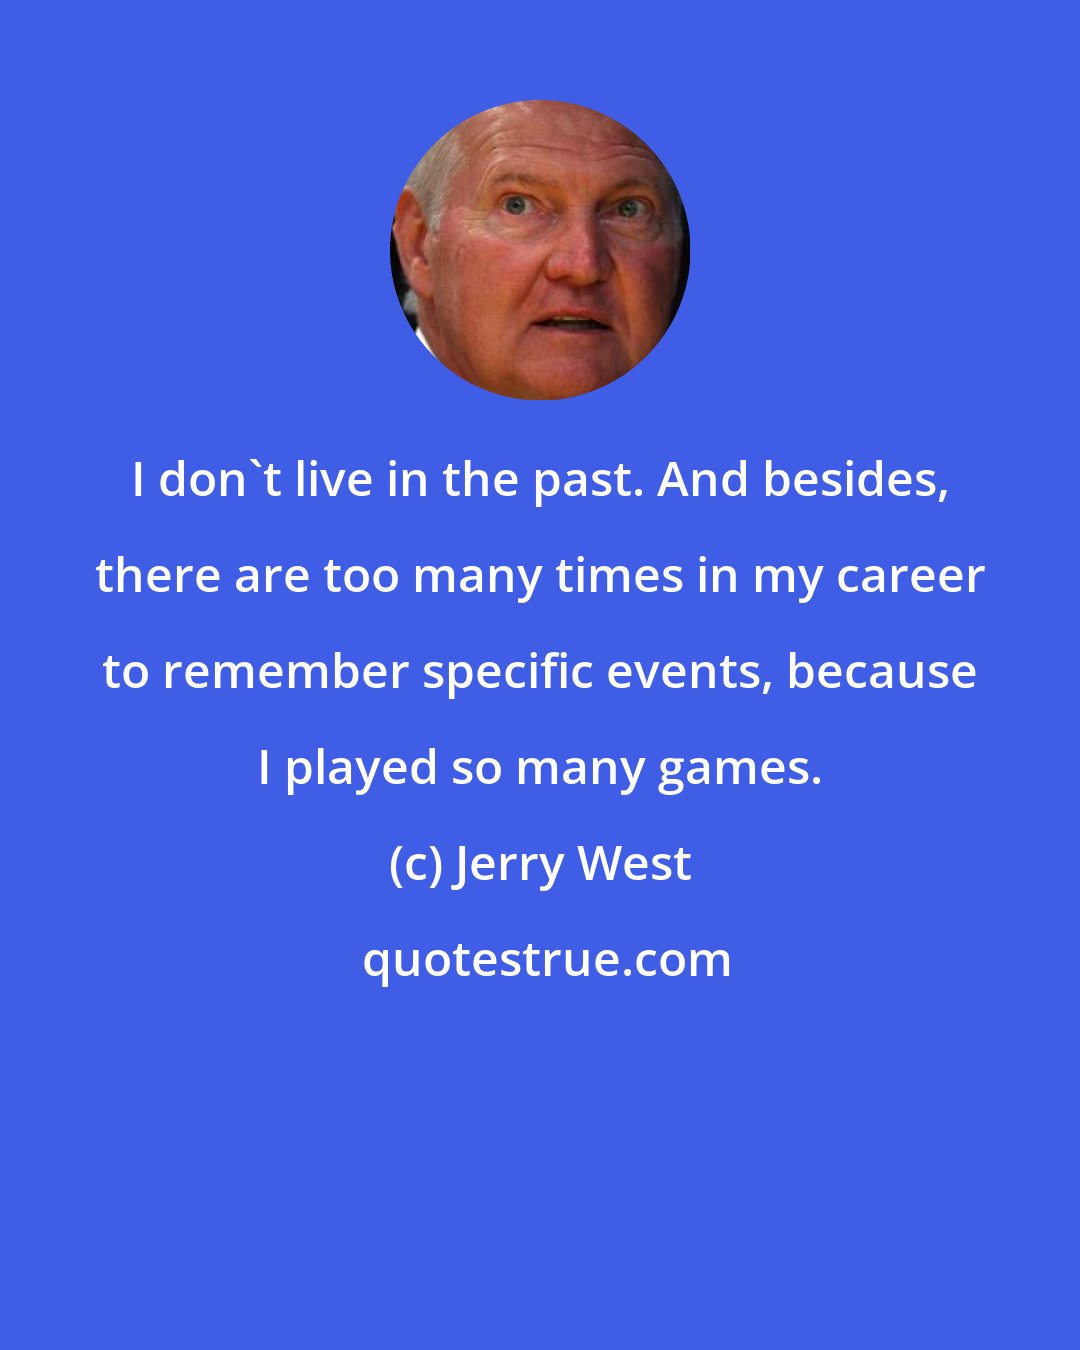 Jerry West: I don't live in the past. And besides, there are too many times in my career to remember specific events, because I played so many games.